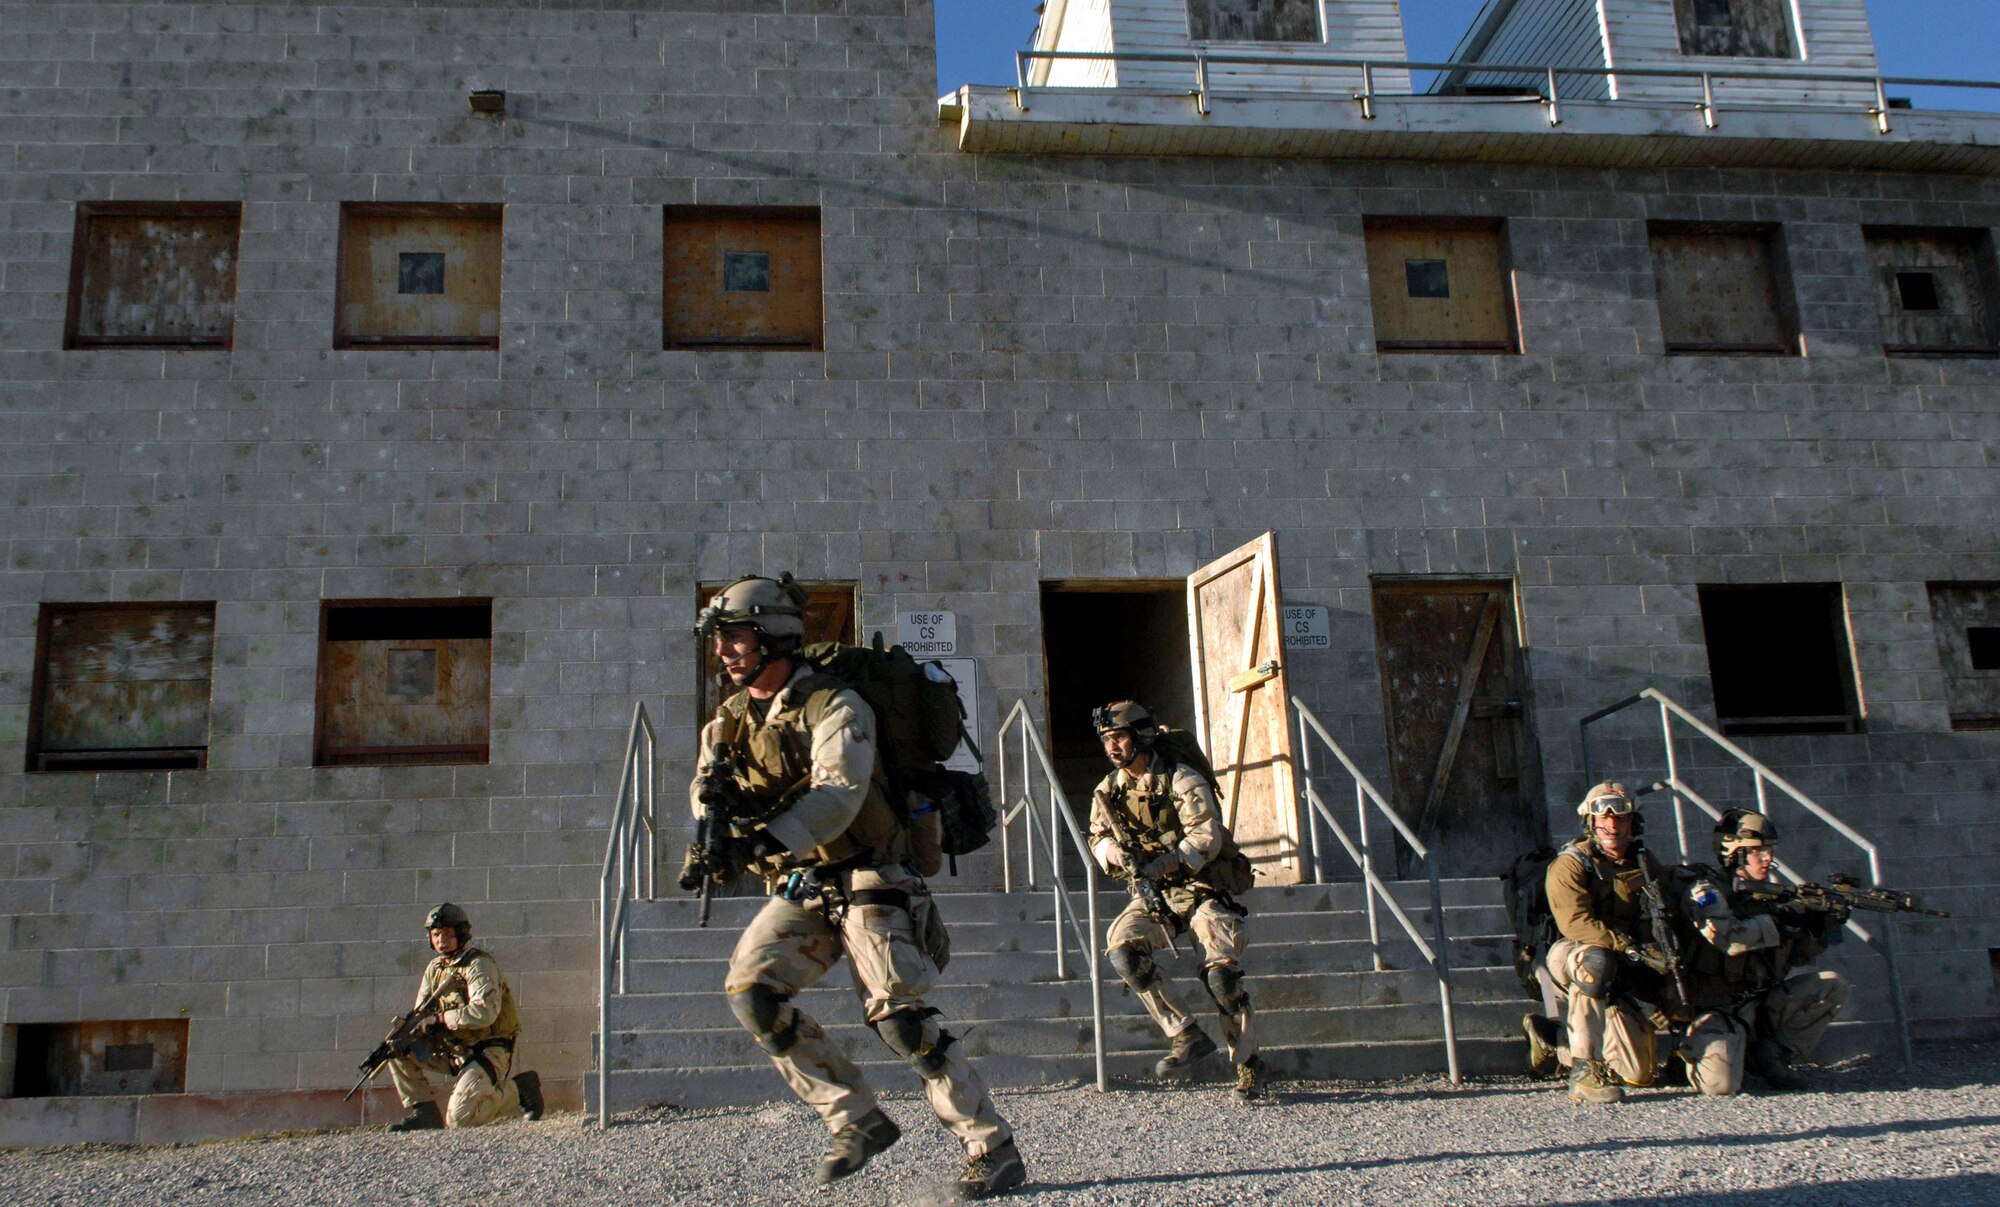 Pararescuemen make an urban village assault during an extraction of a simulated downed pilot during a combat search and rescue integration exercise Nov. 8 at Camp Williams, Utah. The pararescuemen are from the 58th Rescue Squadron, Nellis Air Force Base, Nev. Members of the 34th Weapons Squadron from Nellis AFB led the search and recovery training. The exercise expanded the integration with Utah's 211th Aviation Group AH-64 Apache Joint Rotary Wing, 4th Fighter Squadron F-16 Fighting Falcon assets from Hill AFB, Utah, and special operations forces. Exercise participants also conducted extensive joint combat search and rescue operations against surface-to-air threats. The exercise is being run held Nov. 6 through 15. (U.S. Air Force photo/Master Sgt. Kevin J. Gruenwald) 
